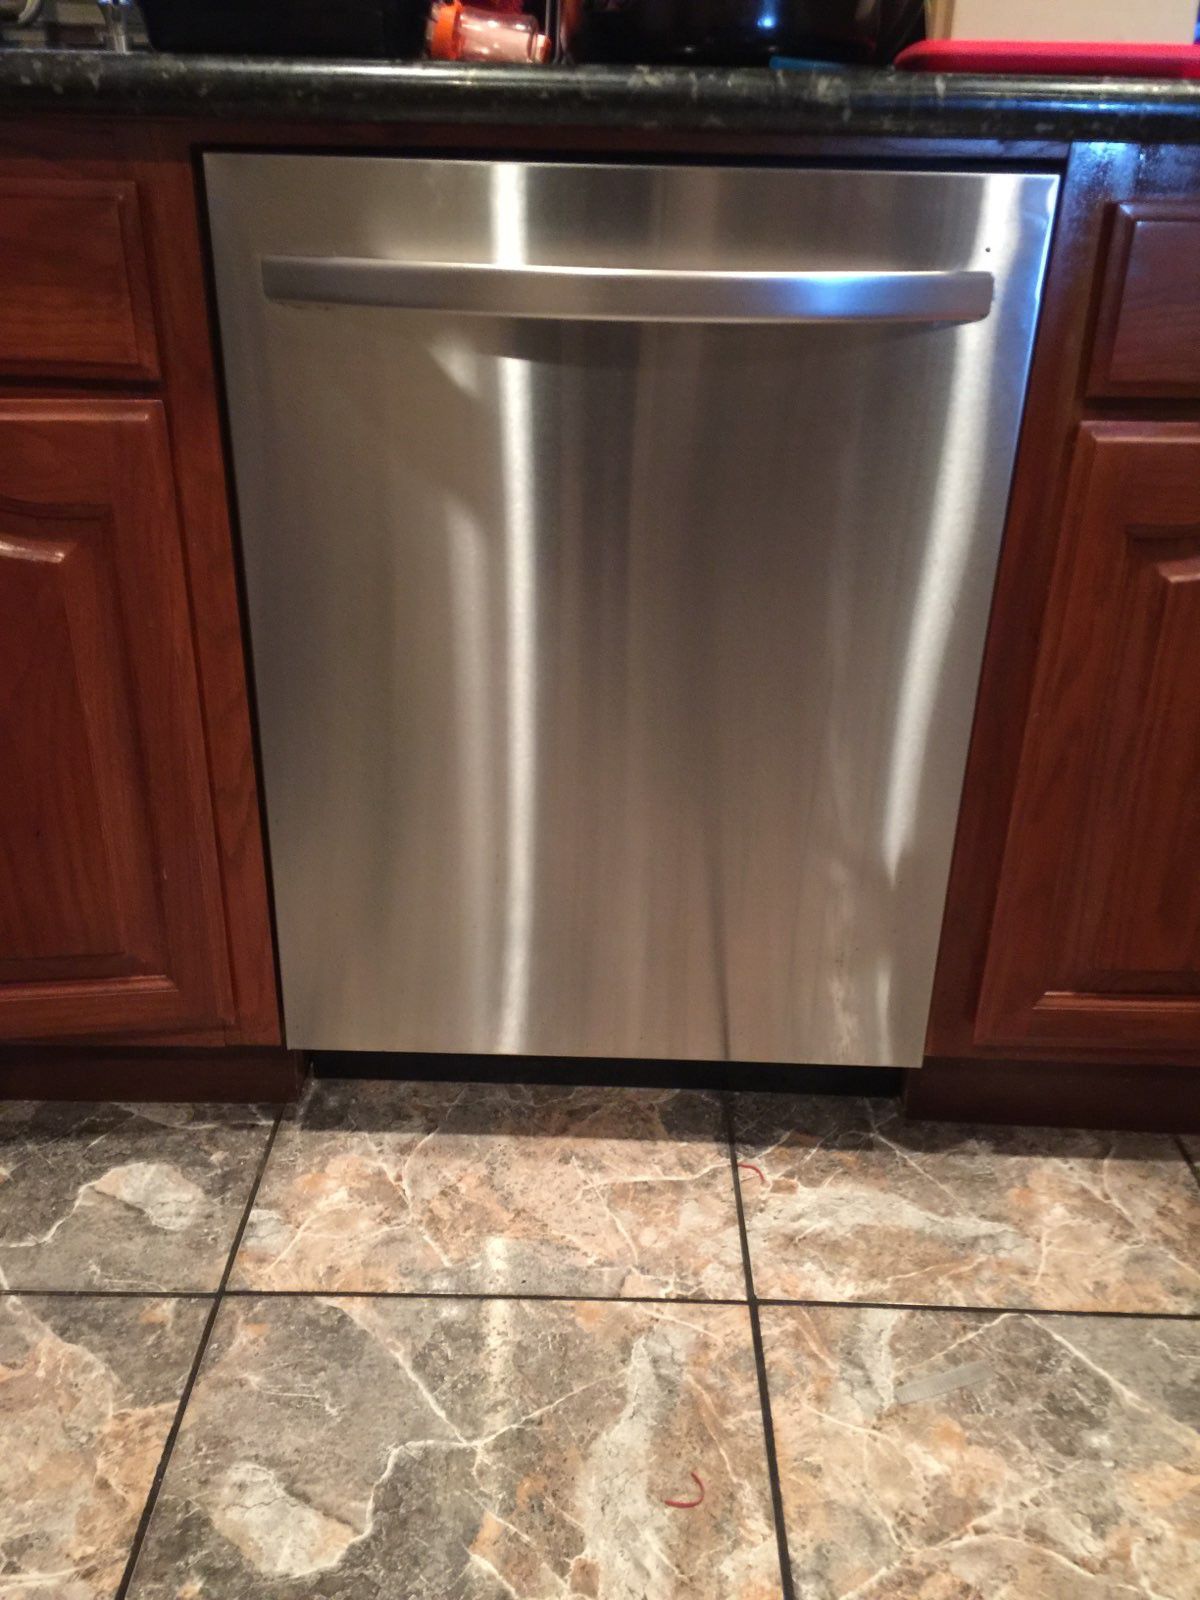 Kenmore Stainless Steel Dishwasher (like new)